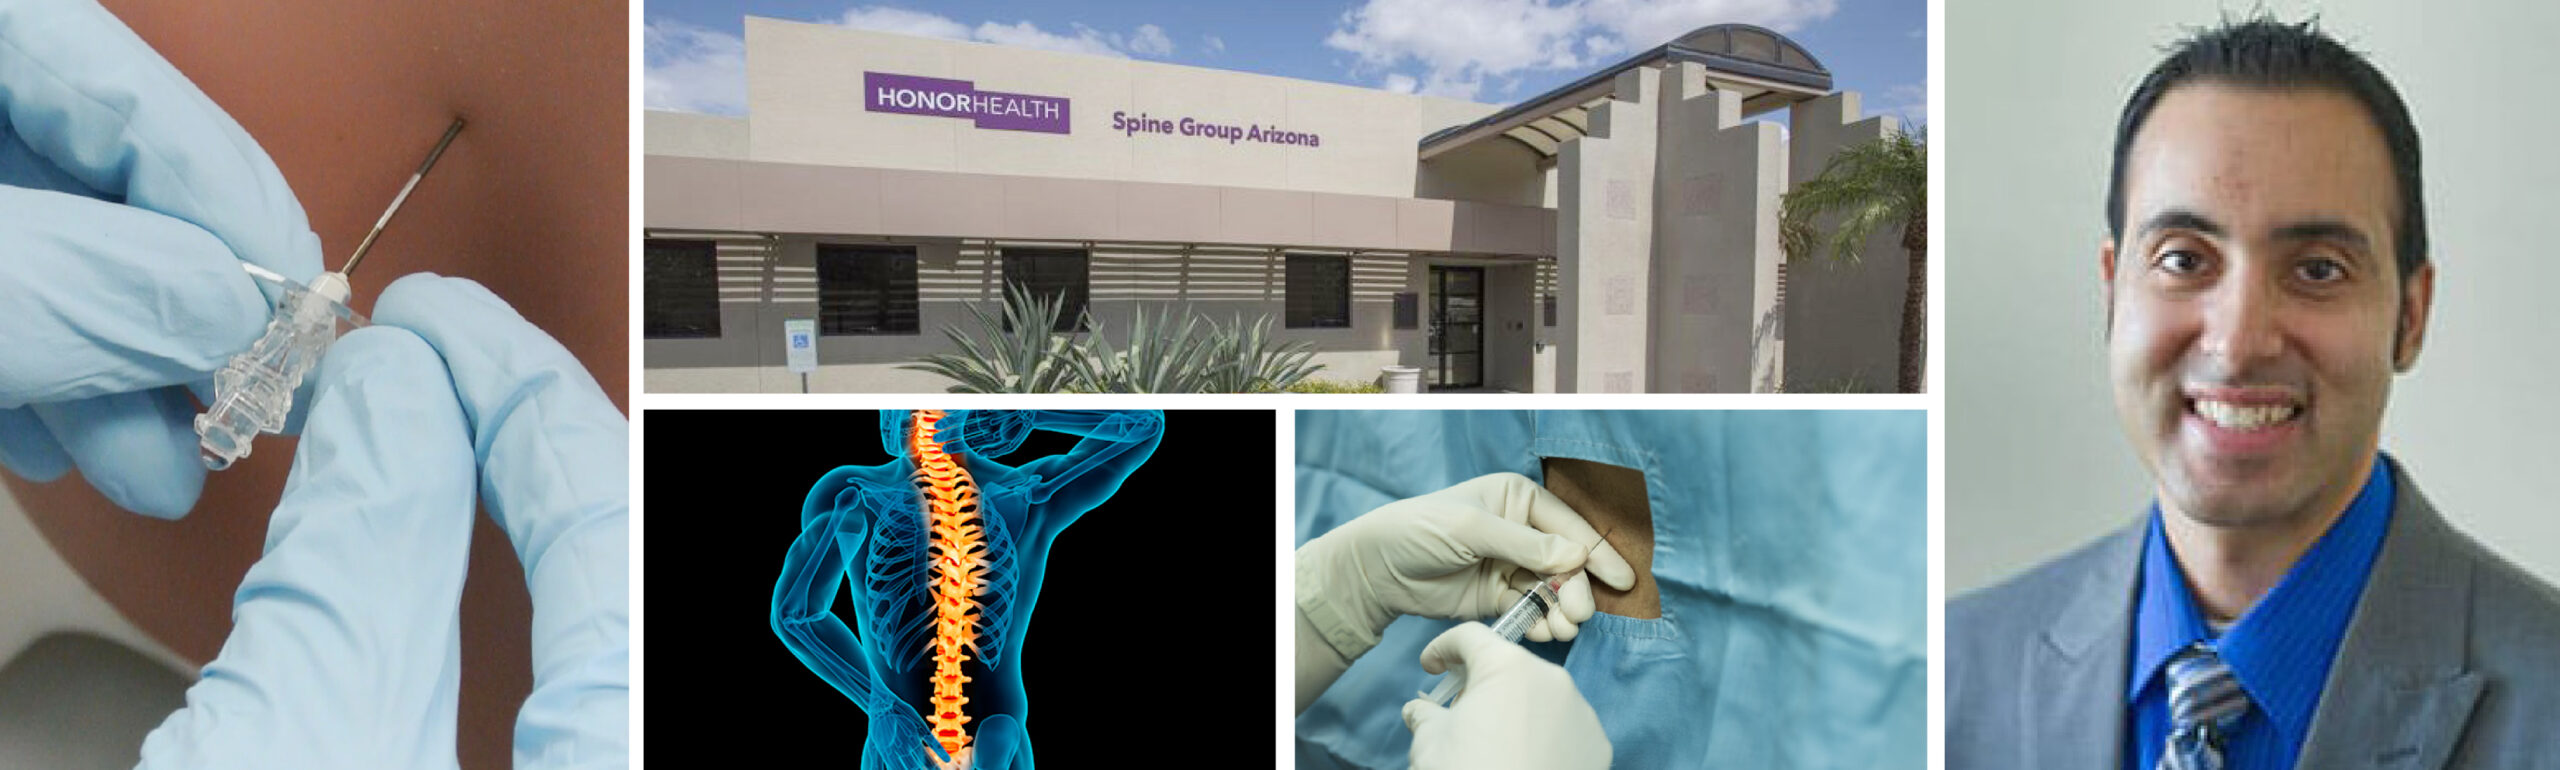 Spine Group Arizona is one of the best!